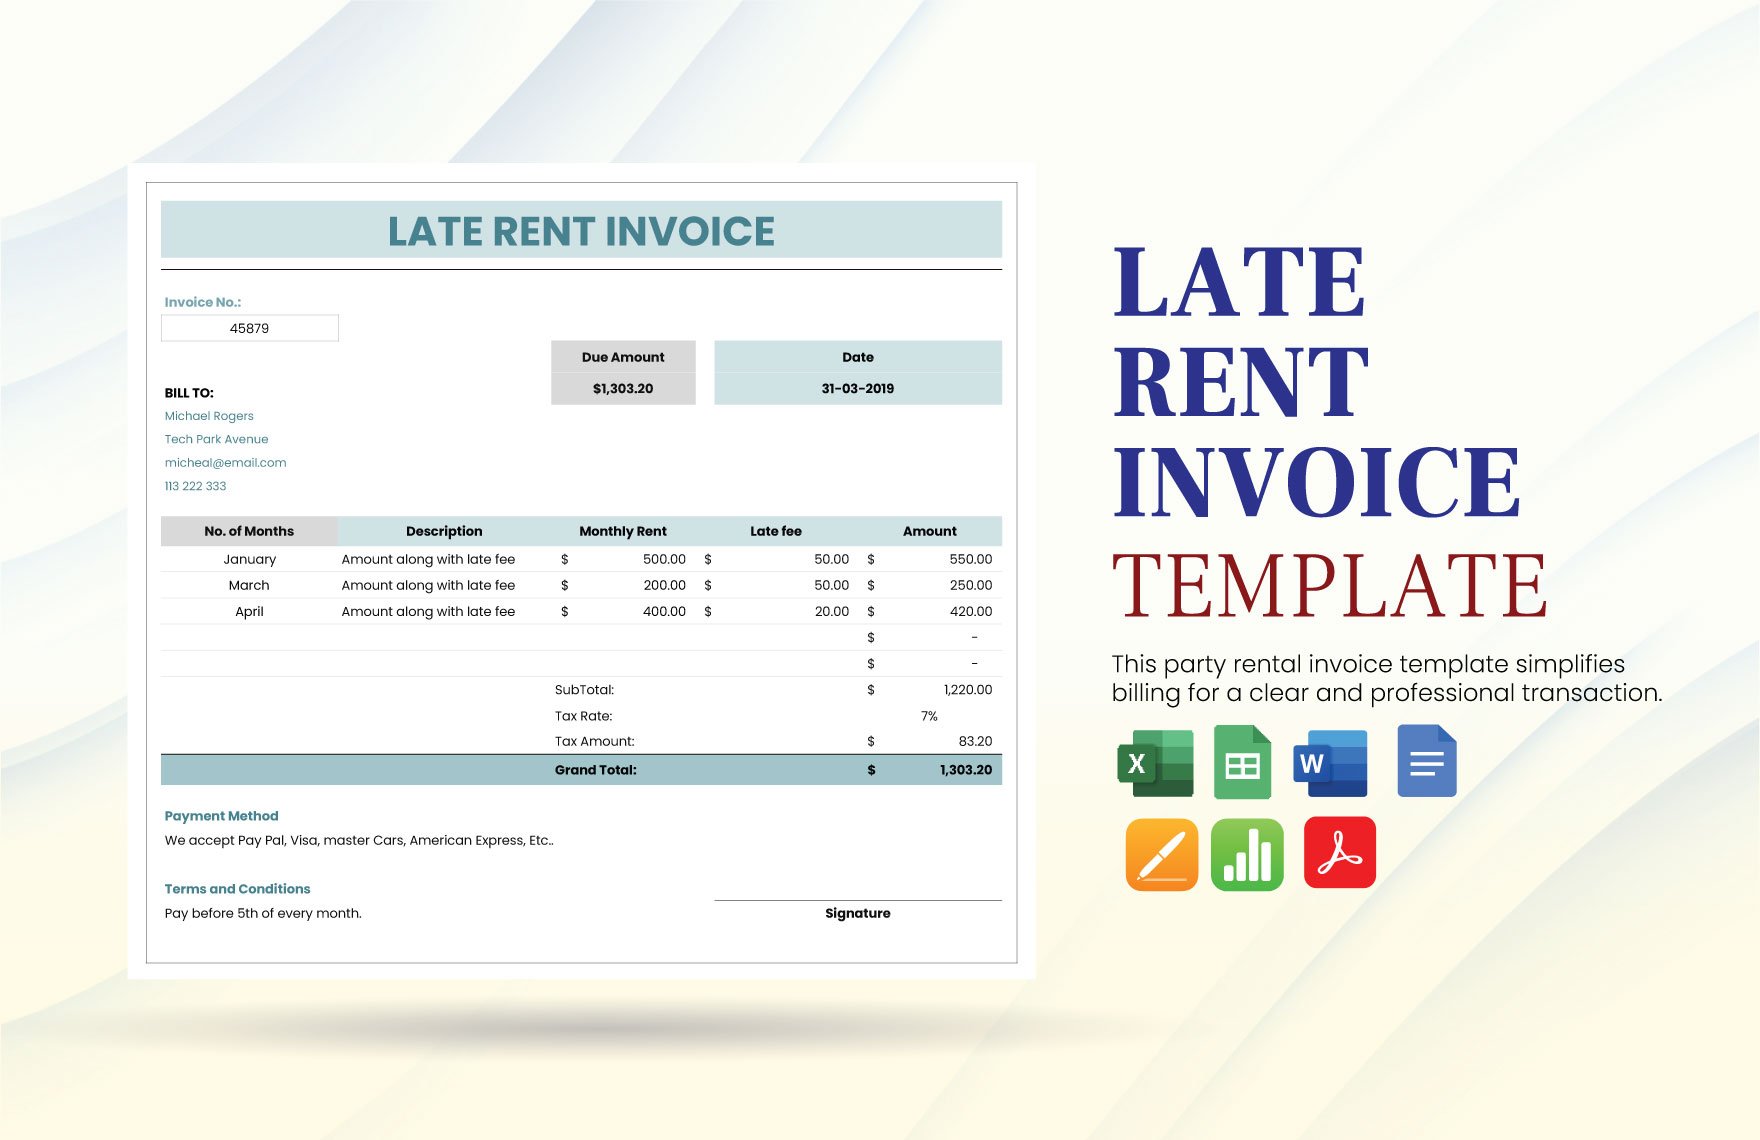 Late Rent Invoice Template